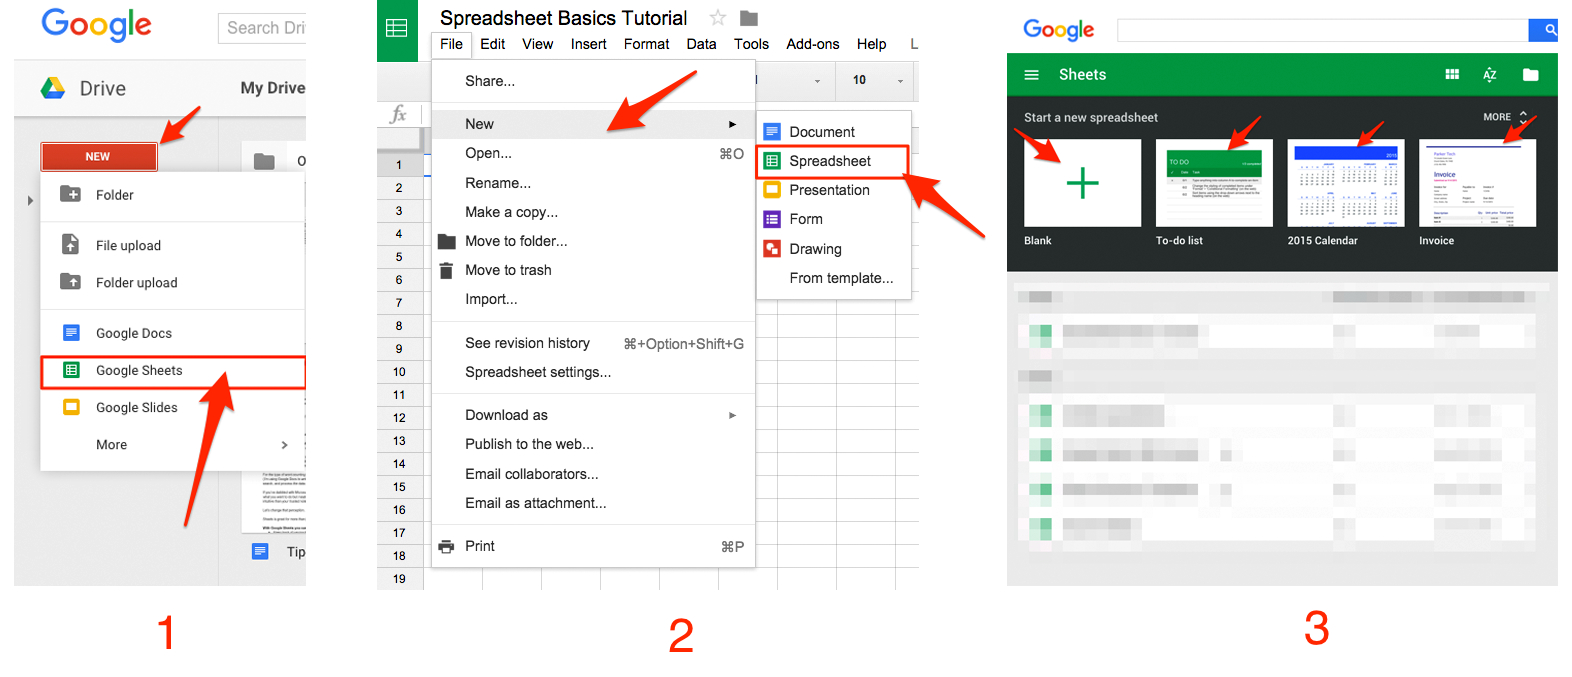 How To Create Spreadsheet In Google Docs With Google Sheets 101: The Beginner's Guide To Online Spreadsheets  The